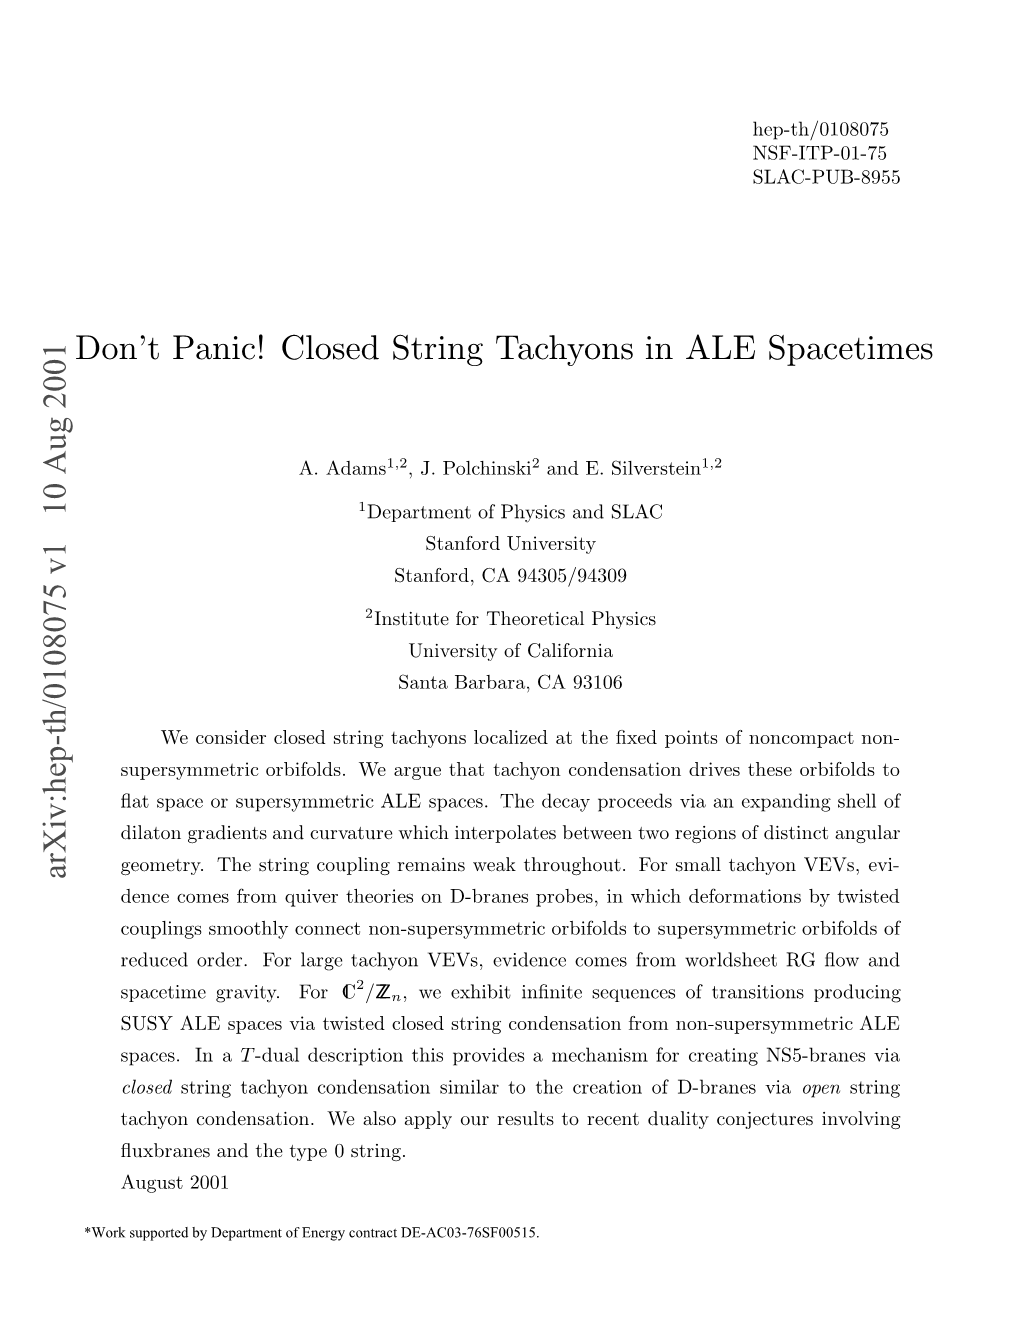 Closed String Tachyons in ALE Spacetimes